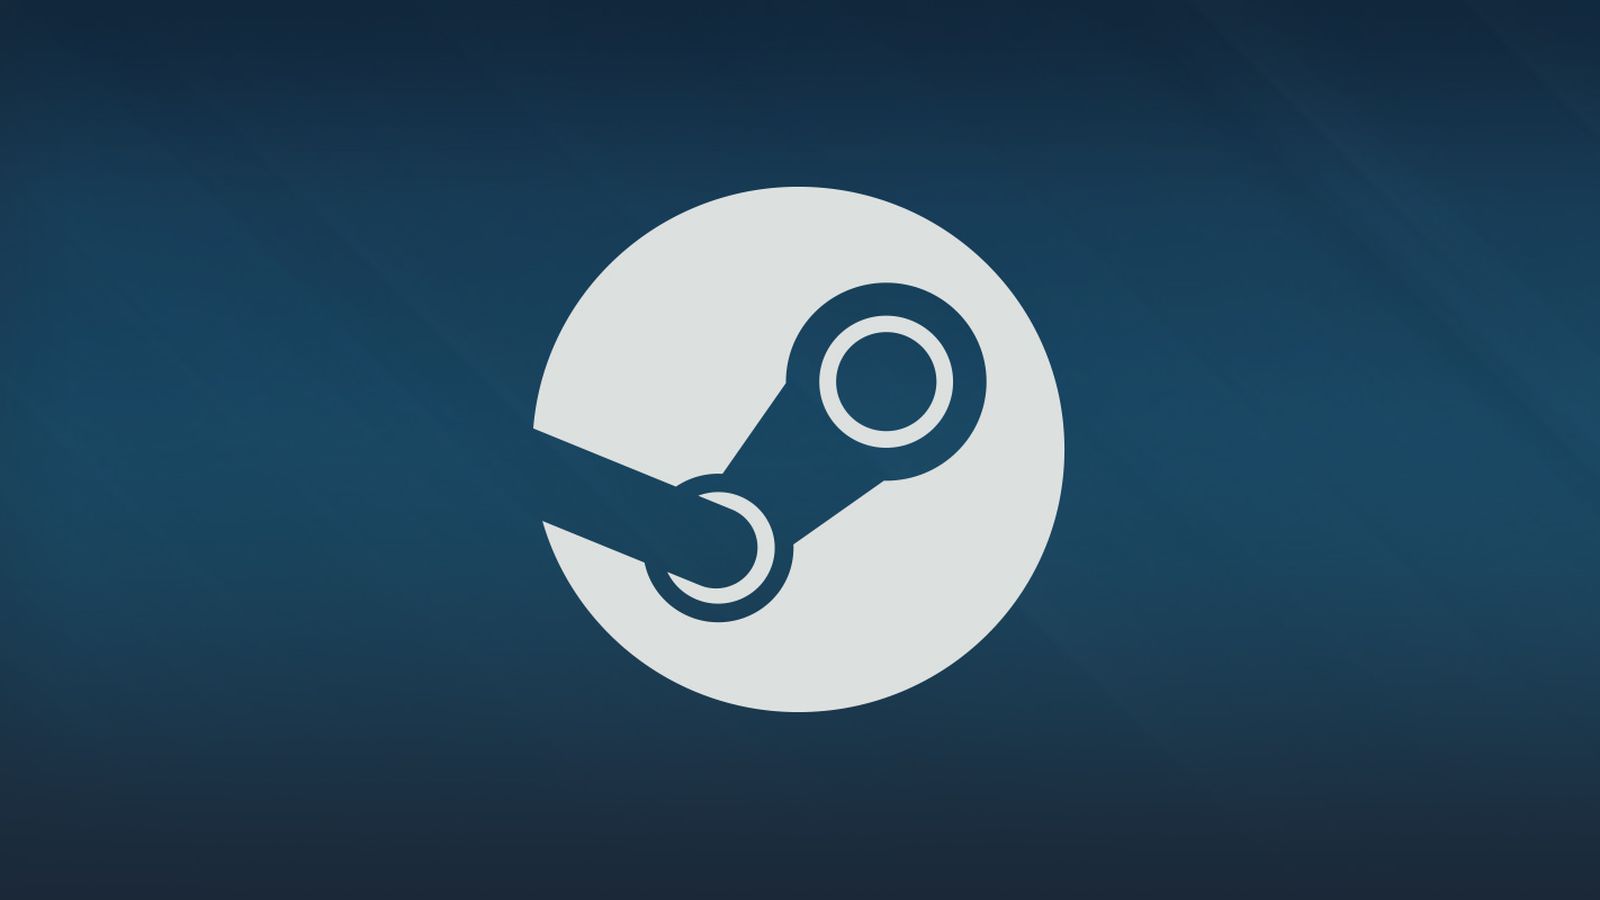 Image for Steam Cloud Gaming appears once again buried in lines of code, fueling rumours Valve is working on its own service [UPDATE]